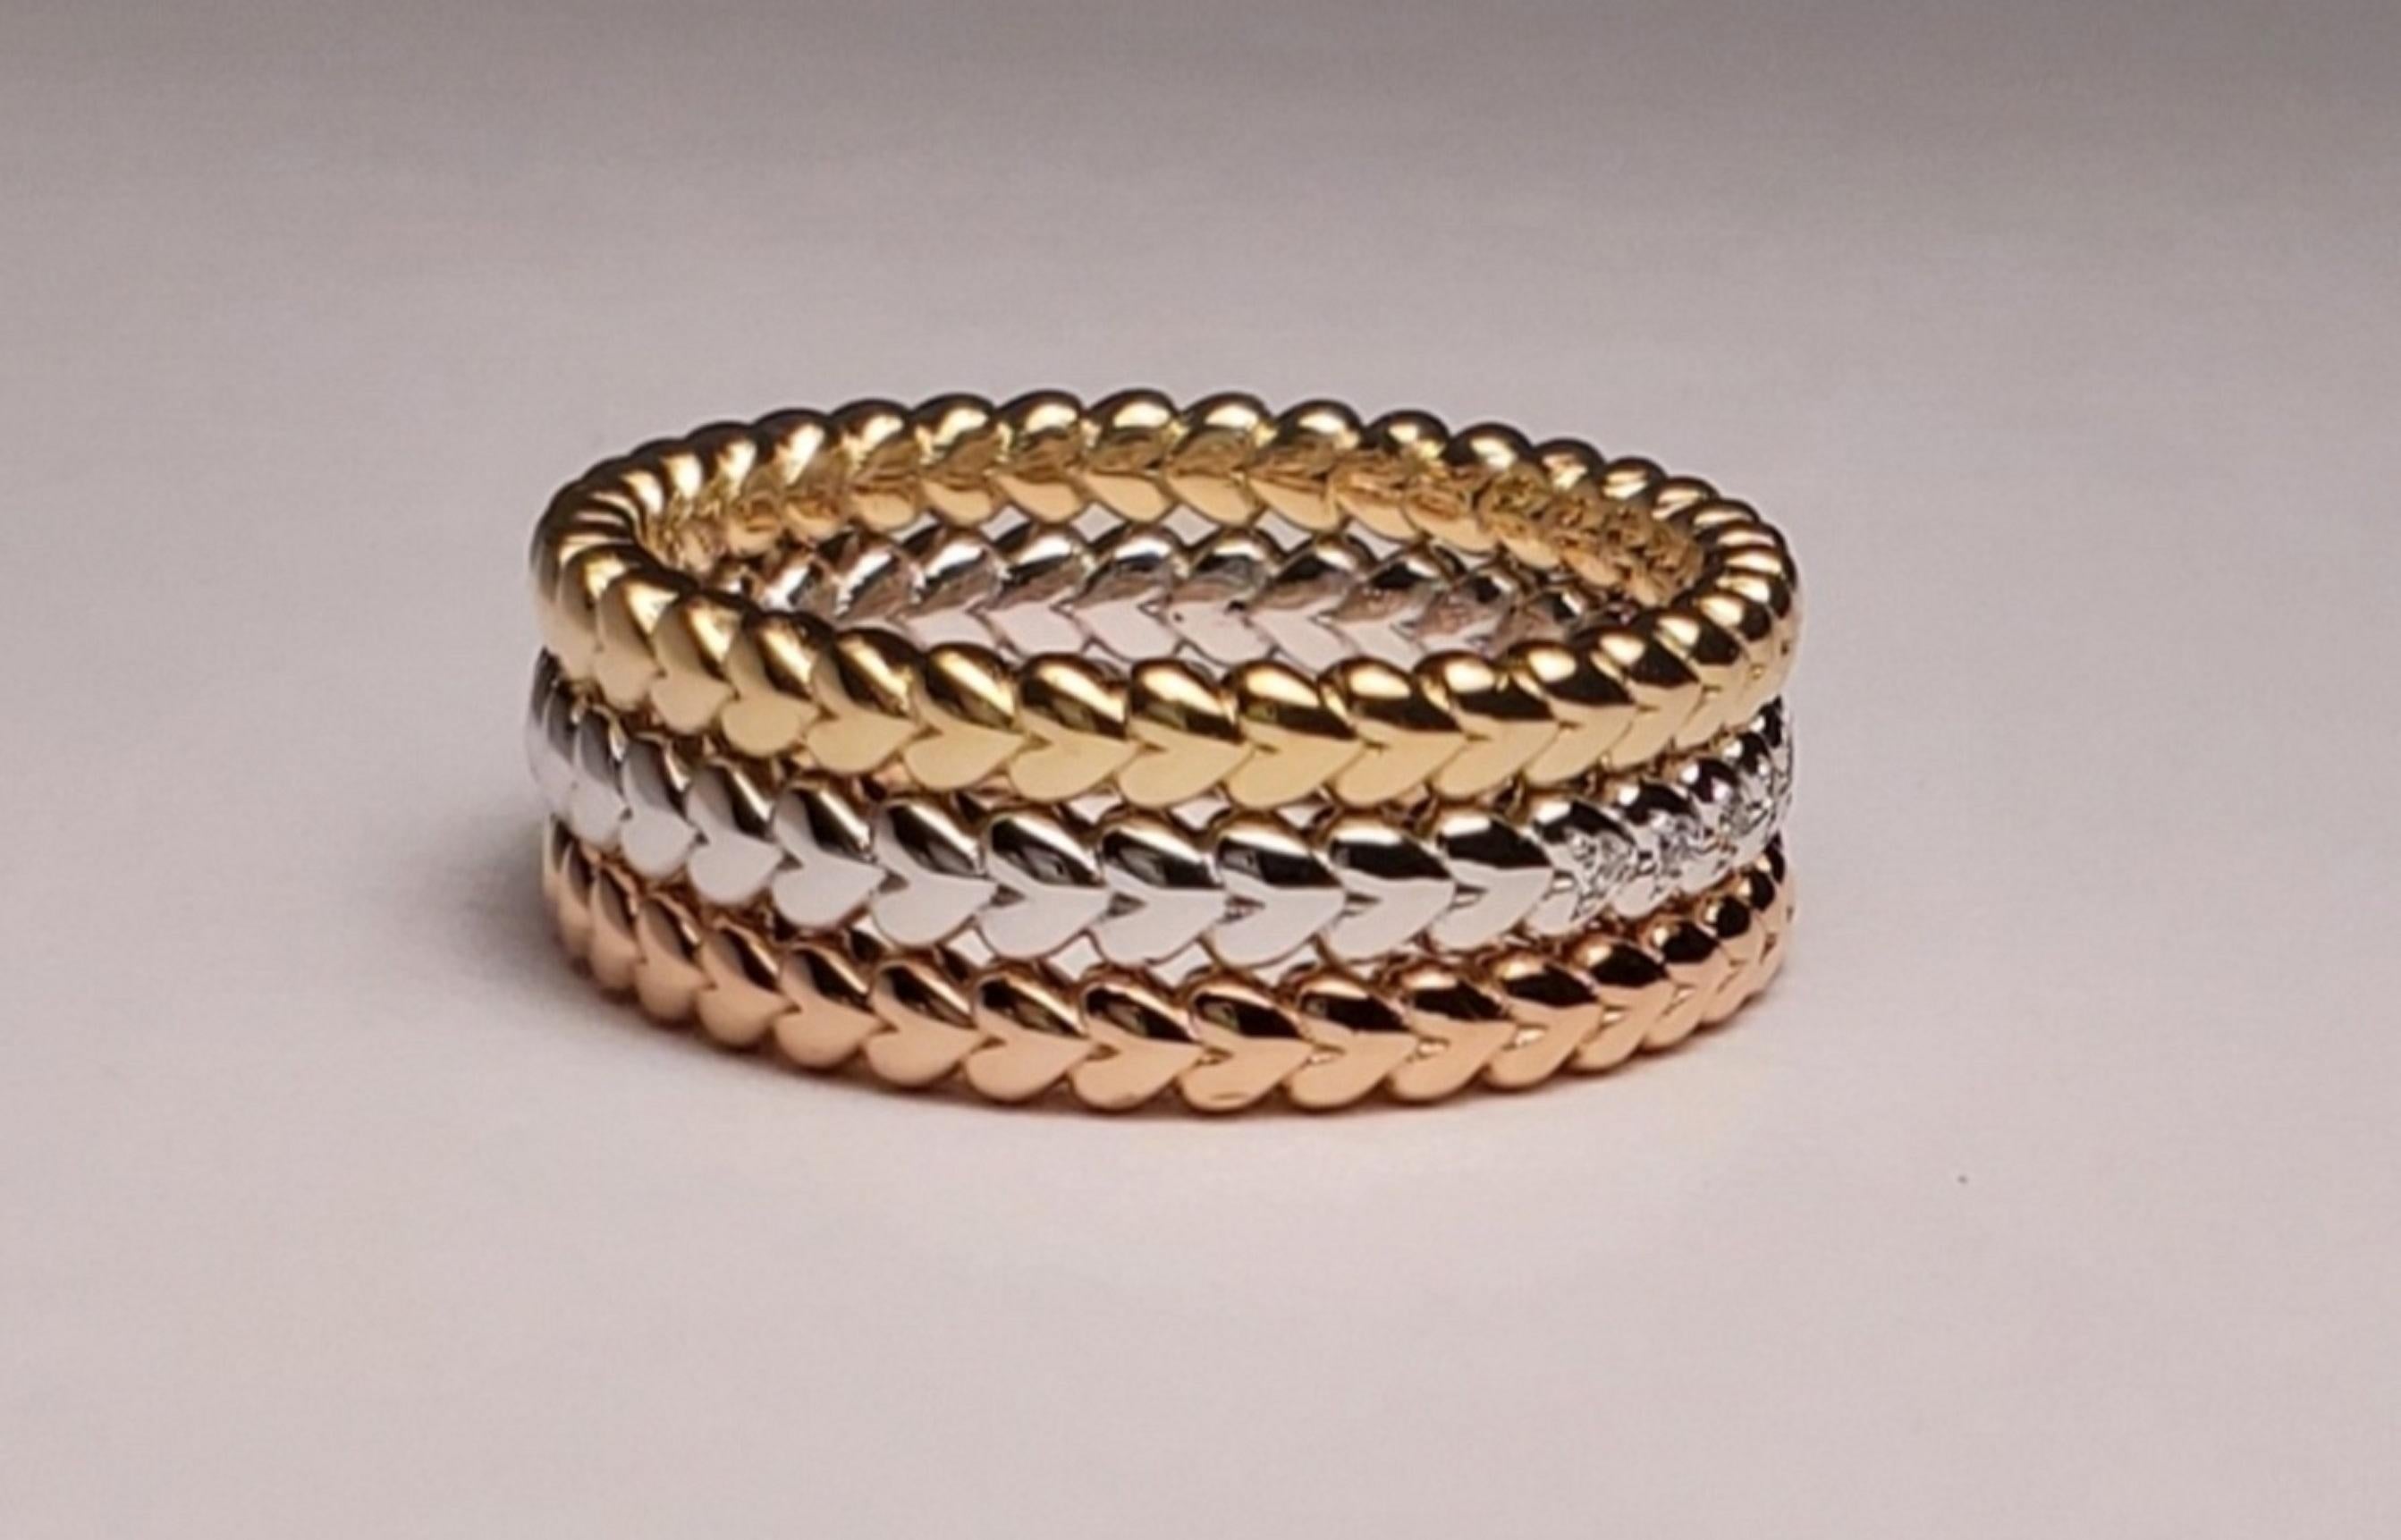 Stack able Set of 3 Rings A ring in full rotation 
of Large tapering Hearts with diamonds that
Spiral around with the Flow of Love
stones: 33 round diamonds 
color: G
clarity: VS
weight: .12pts.
gold: 14k
size: 7 (rings can be made to fit your